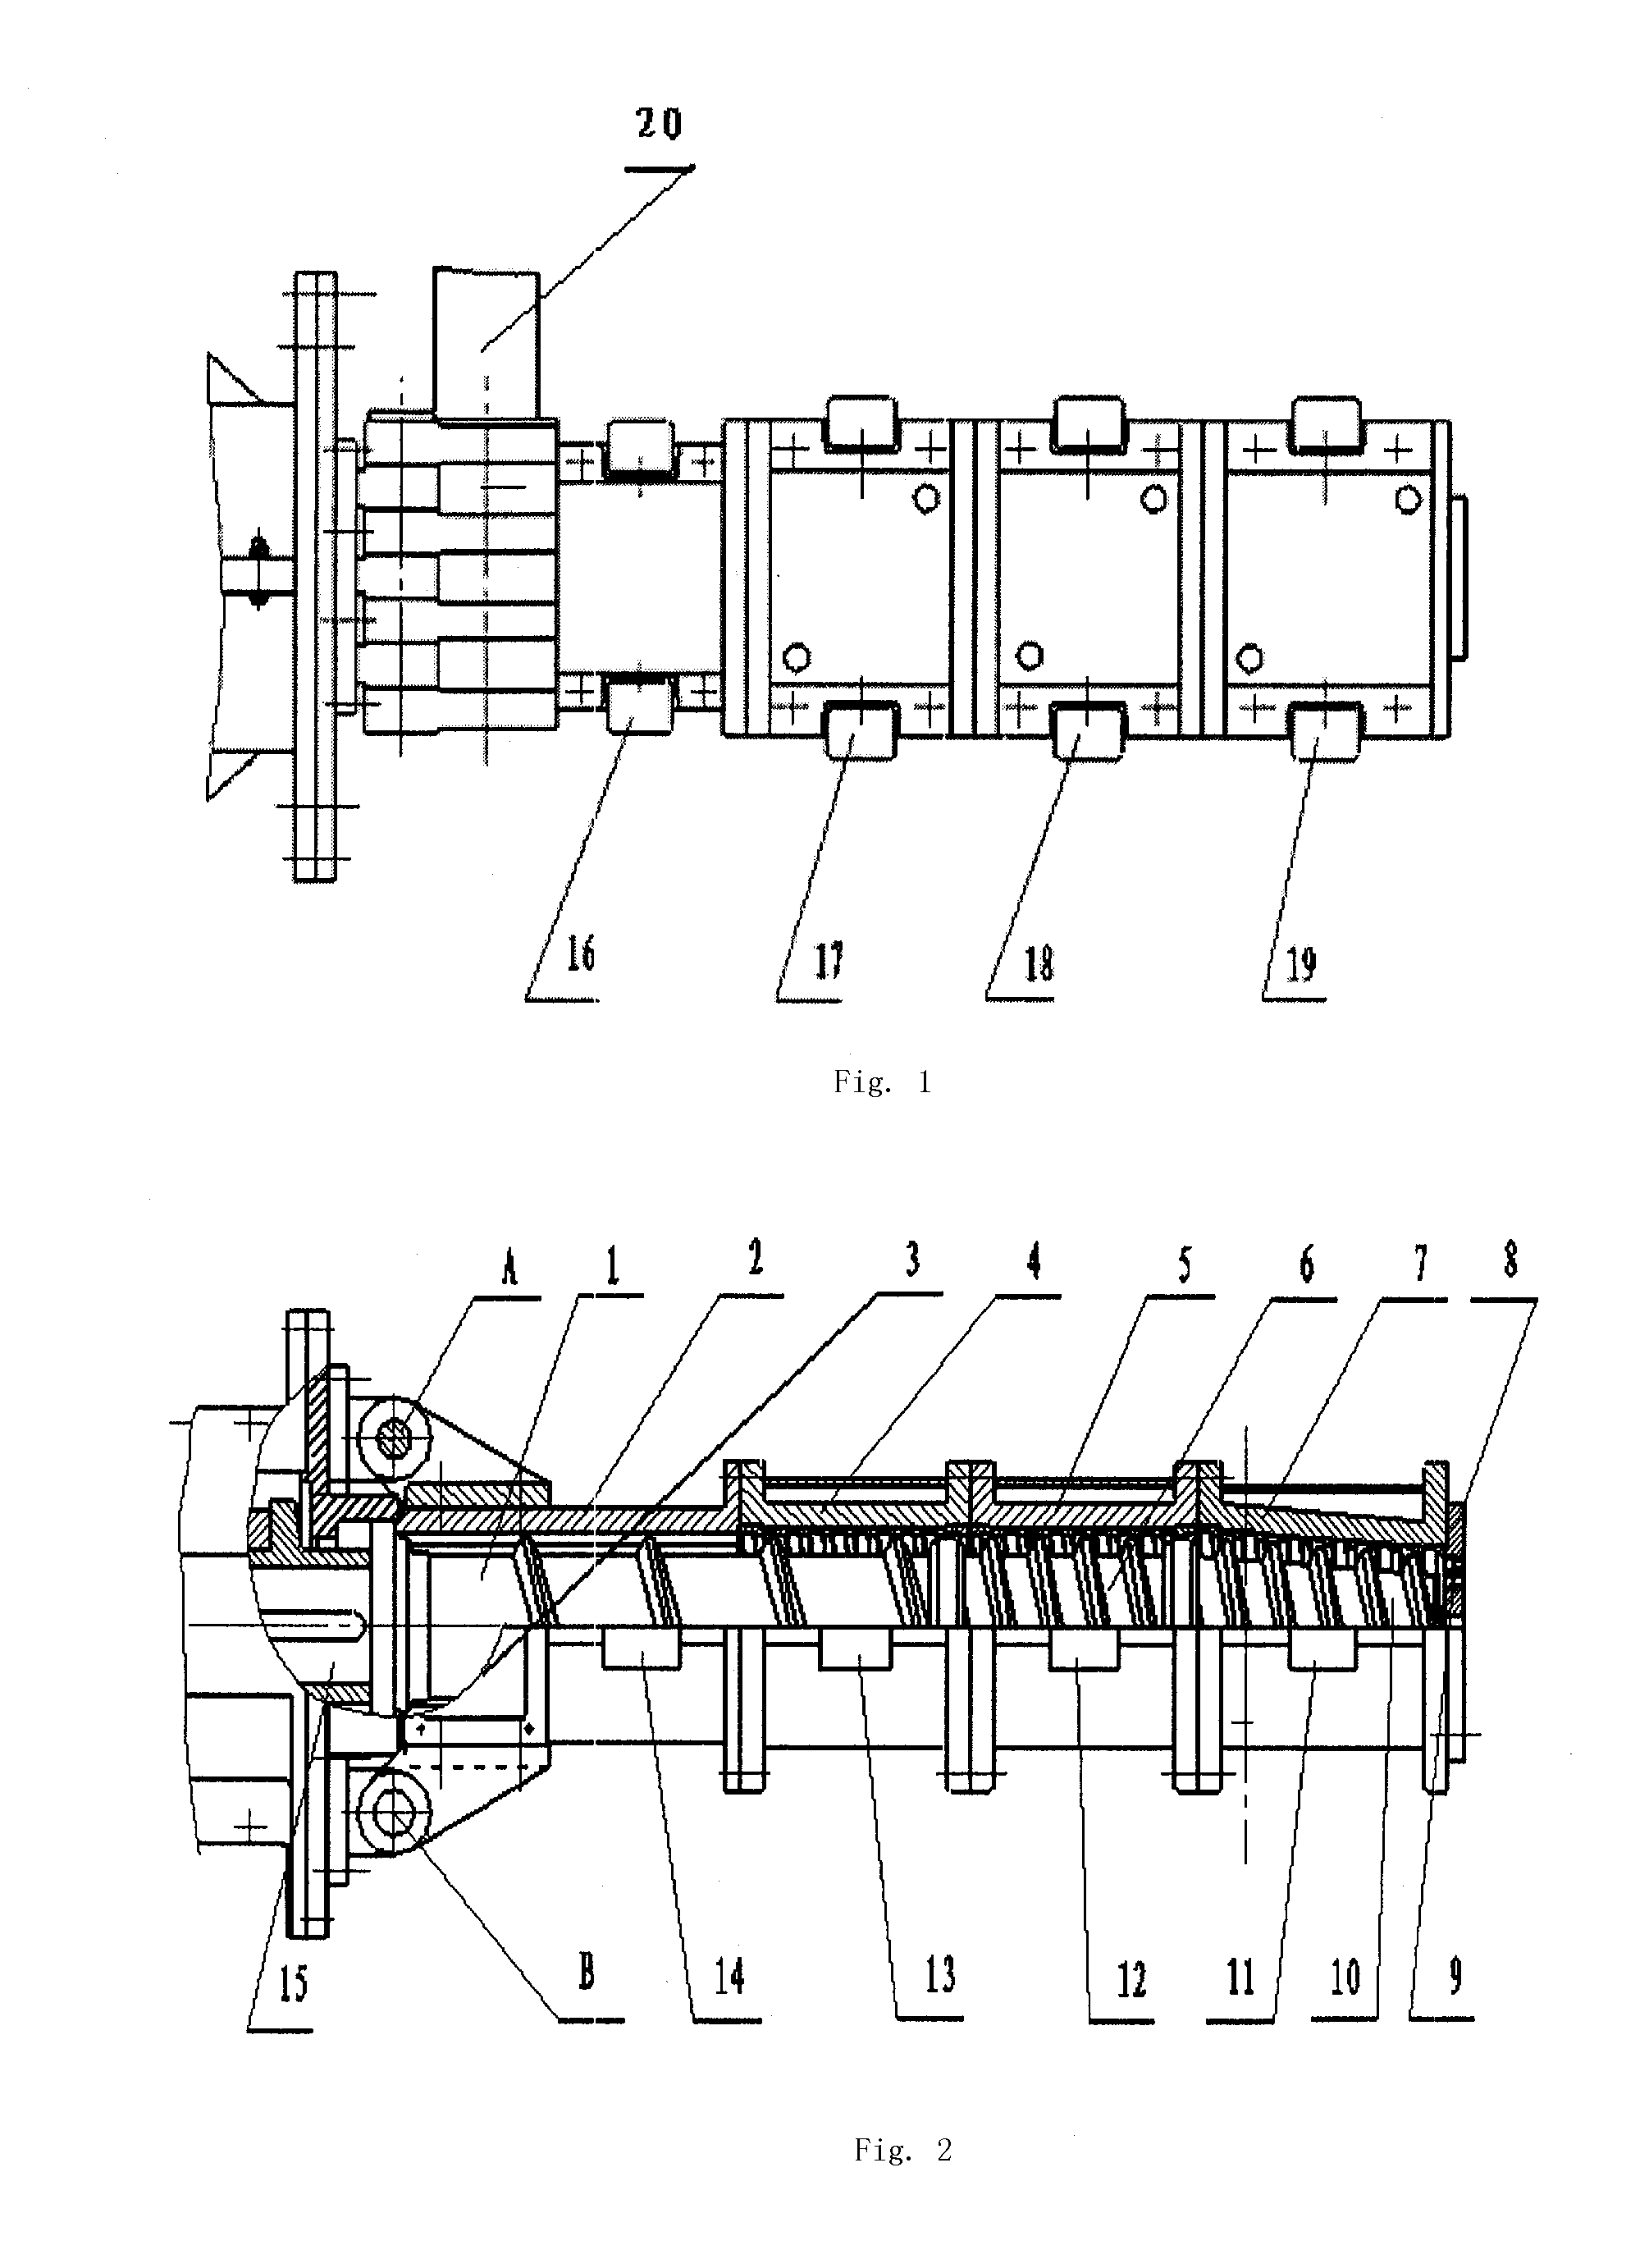 Processing method and device for extrusion of beer adjunct with or without enzymes added, and saccharogenic method for extruded beer adjunct